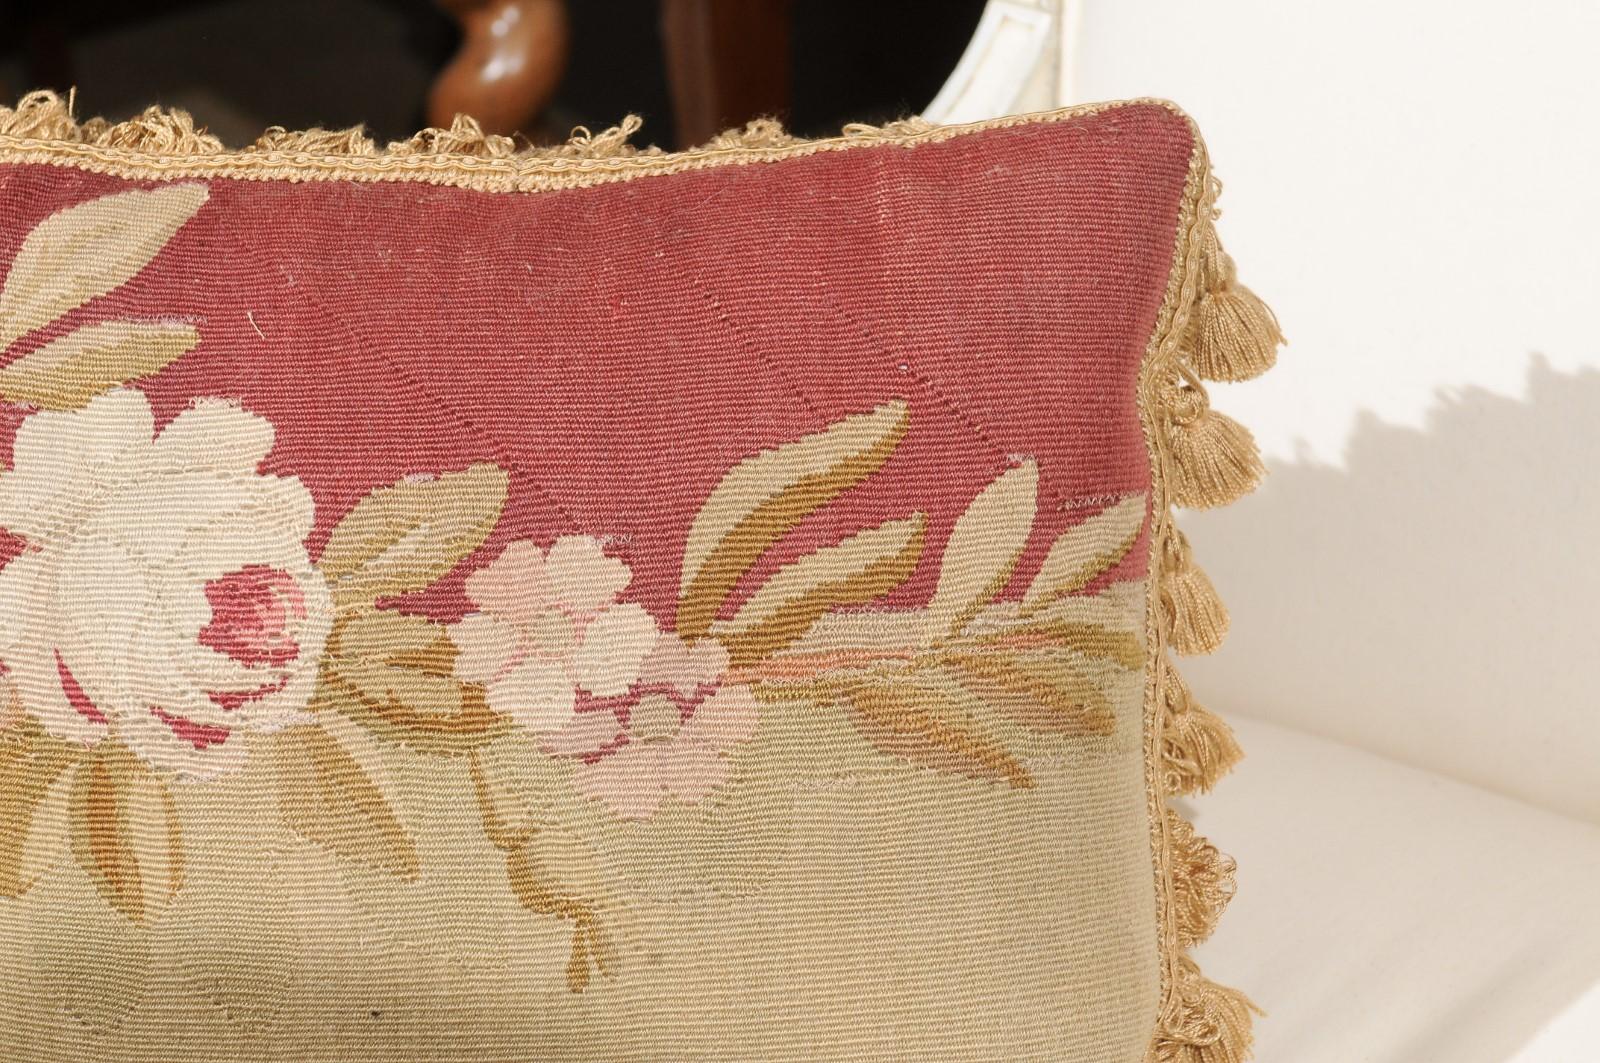 French 19th Century Aubusson Tapestry Pillow with Rose and Tassels For Sale 6